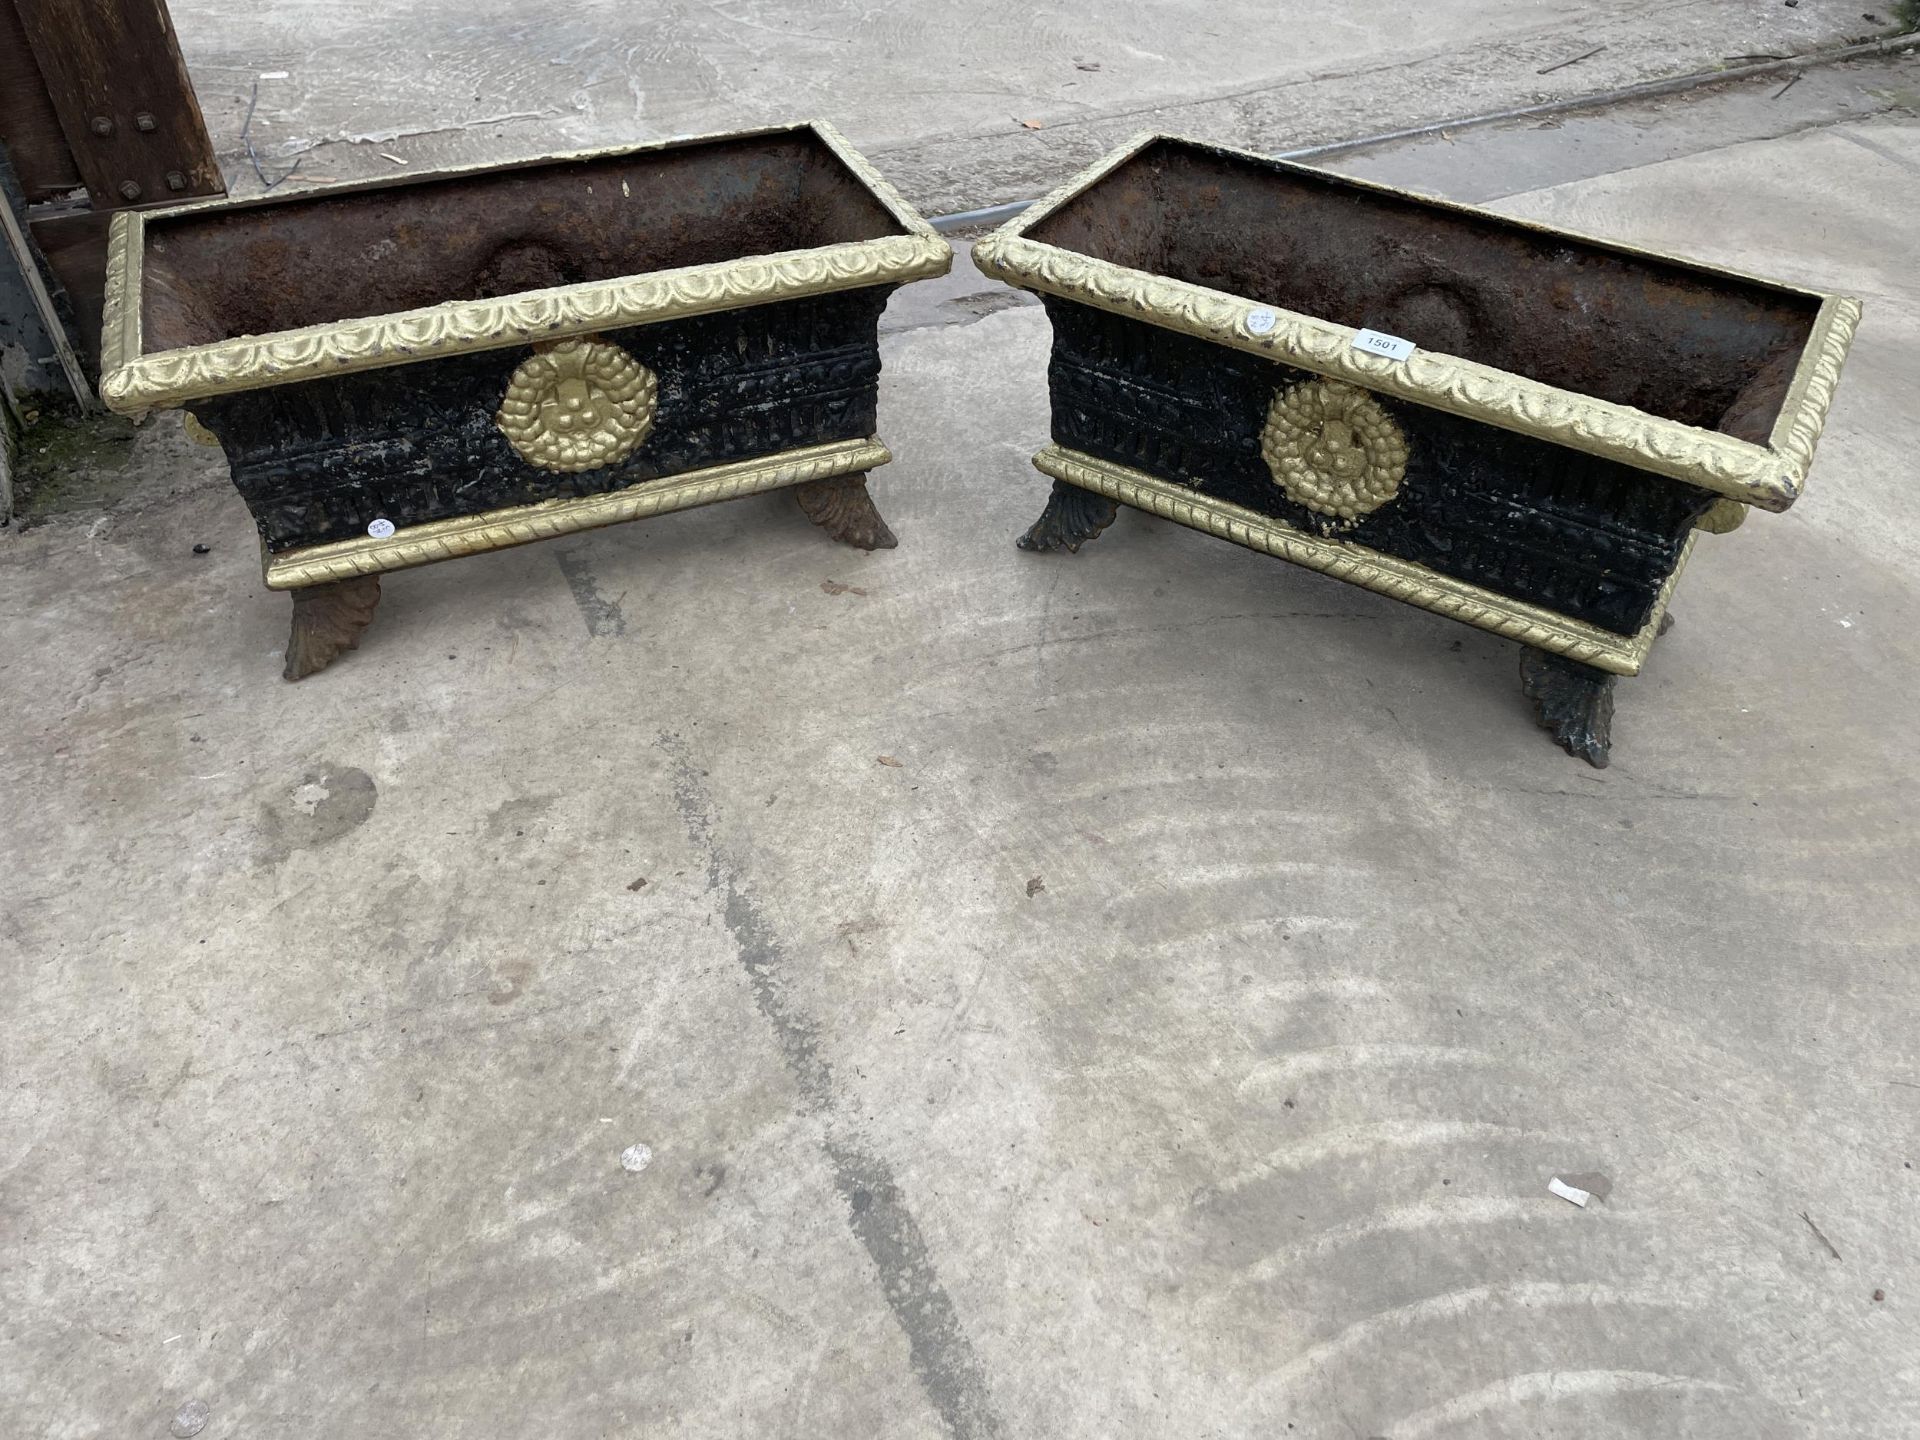 A PAIR OF VINTAGE DECORATIVE BLACK AND GOLD PAINTED CAST IRON TROUGH PLANTERS